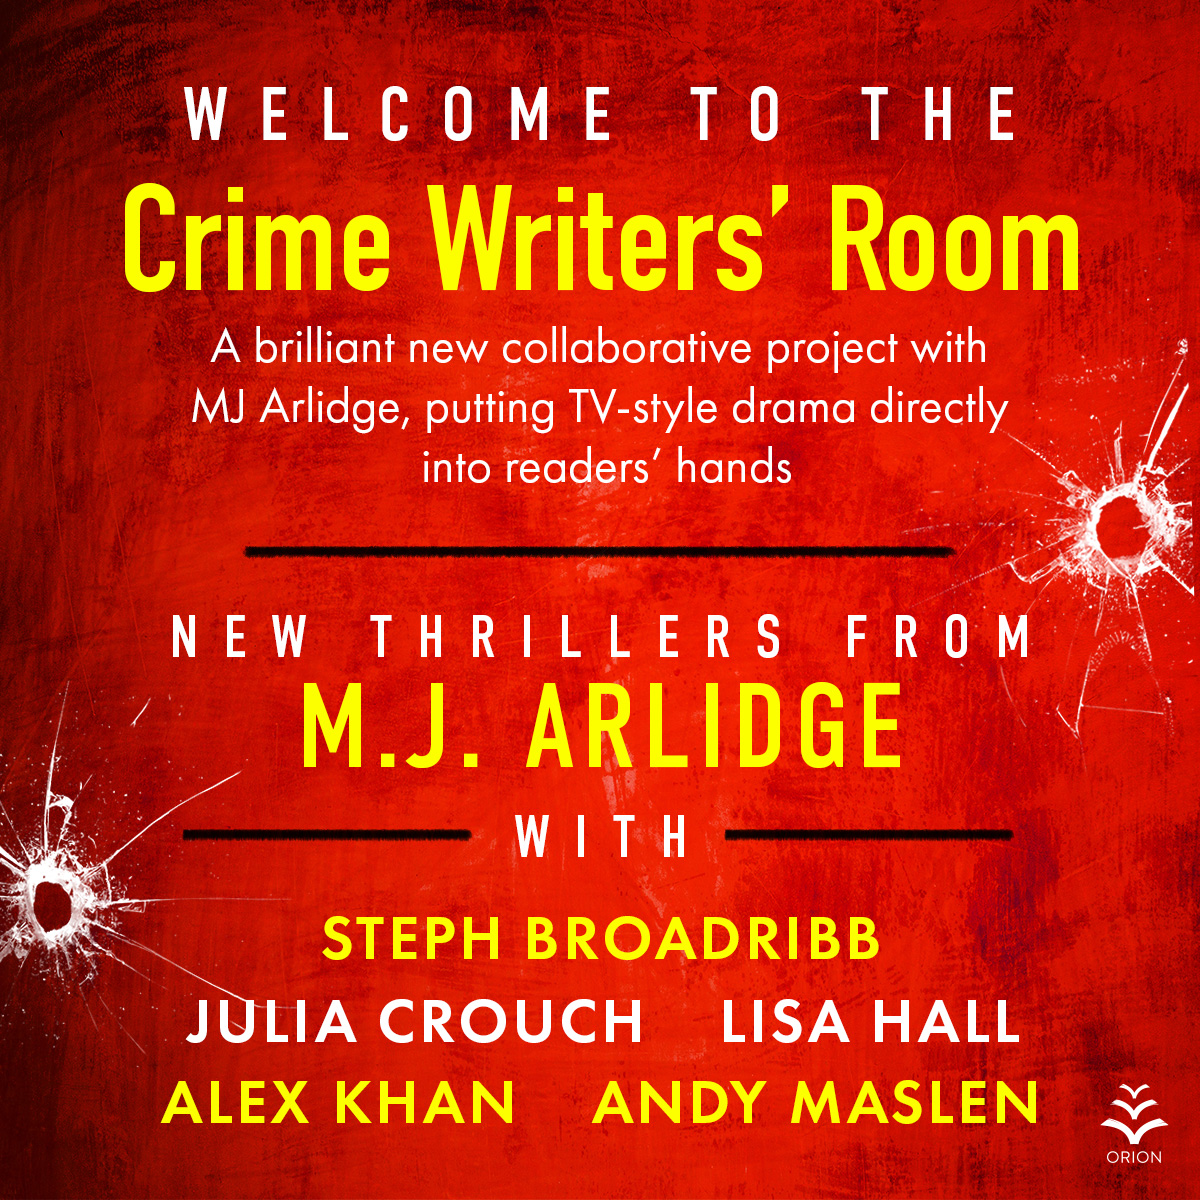 Thrilled to be part of a new collaborative project with MJ Arlidge and some of the most talented writers in the business. We've set up a TV-style writers' room, cooking up five new crime thrillers to be released over the next two years. The first book is out this month!